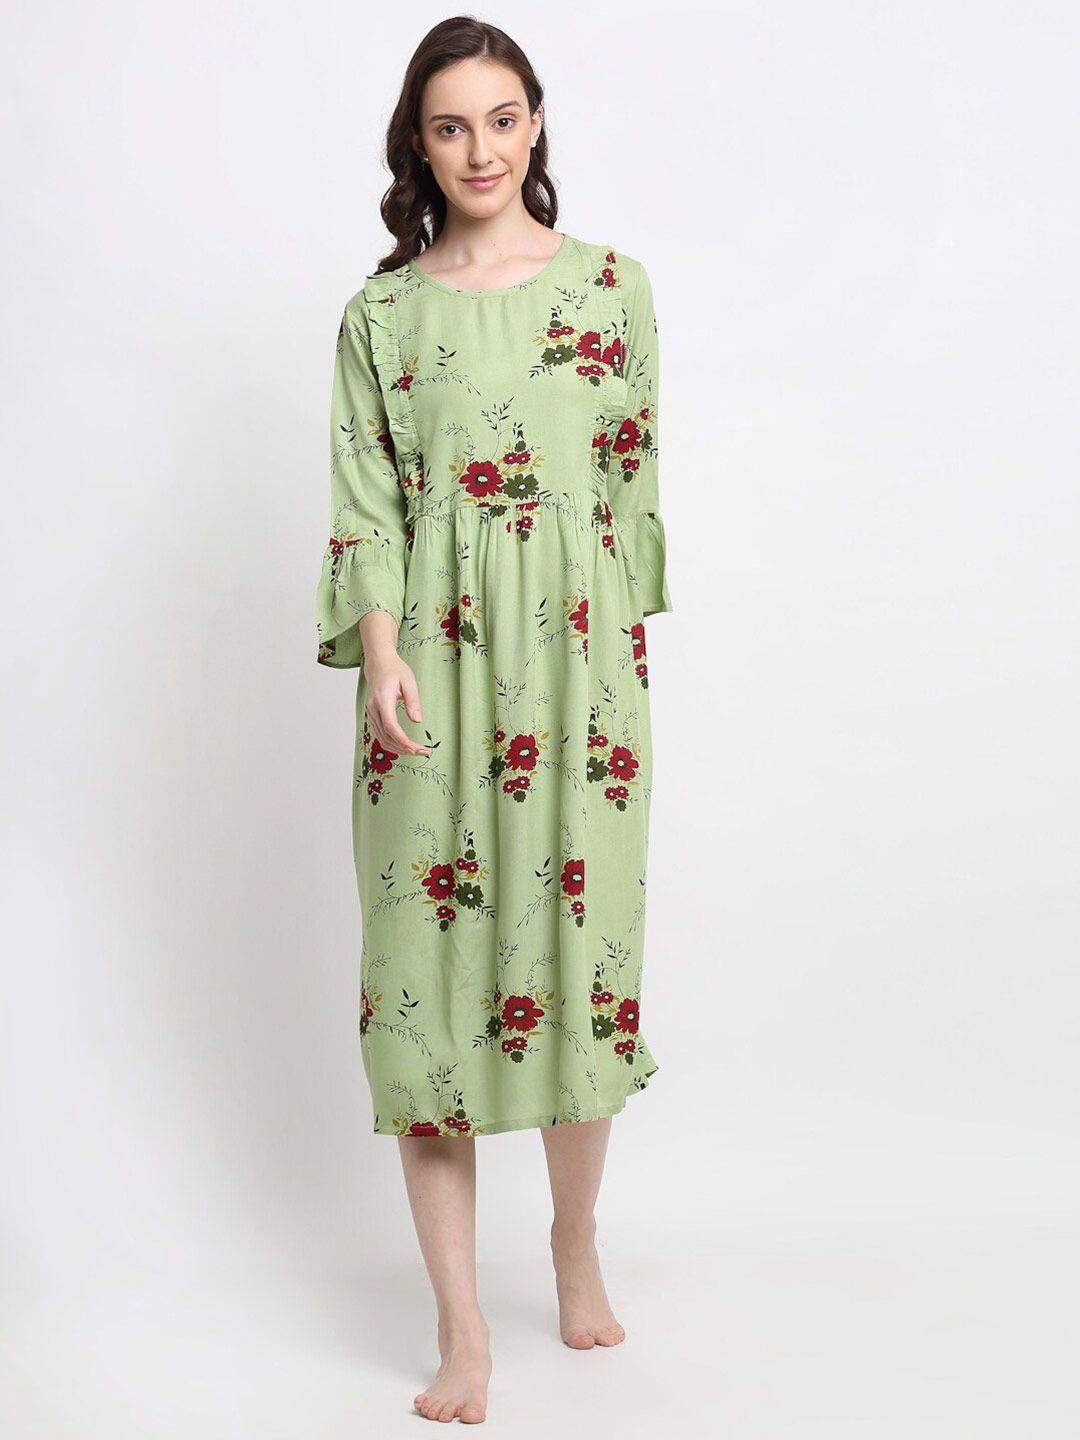 katn india maternity green printed floral nightdress